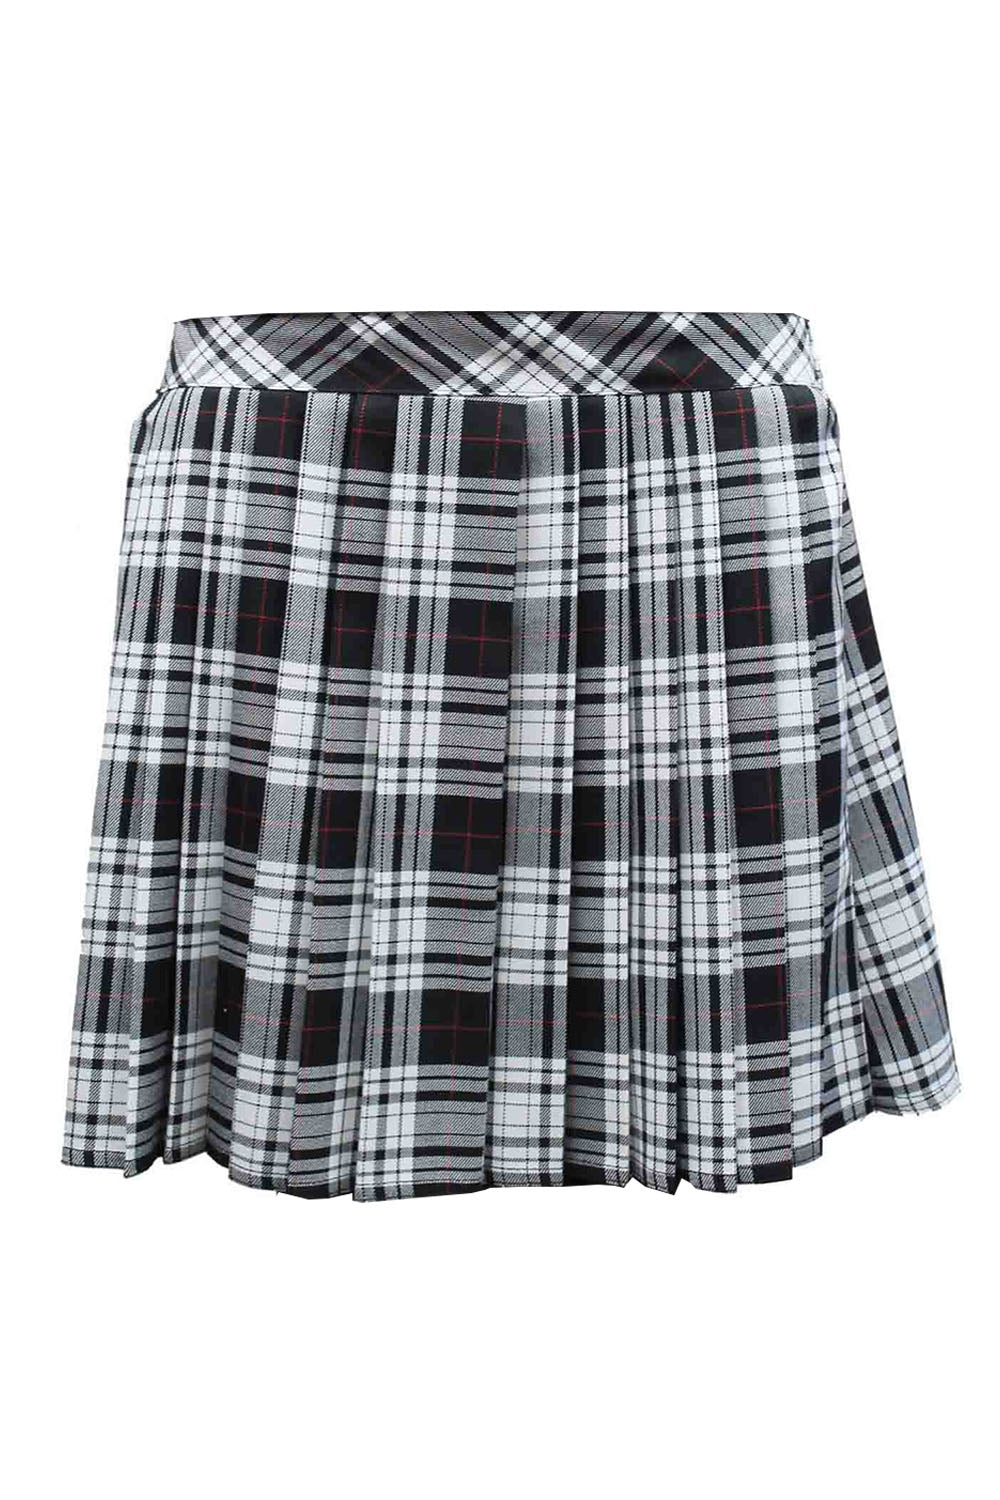 Crazy Chick Adult Pleated Elastic Tartan Skirt (16 Inches)